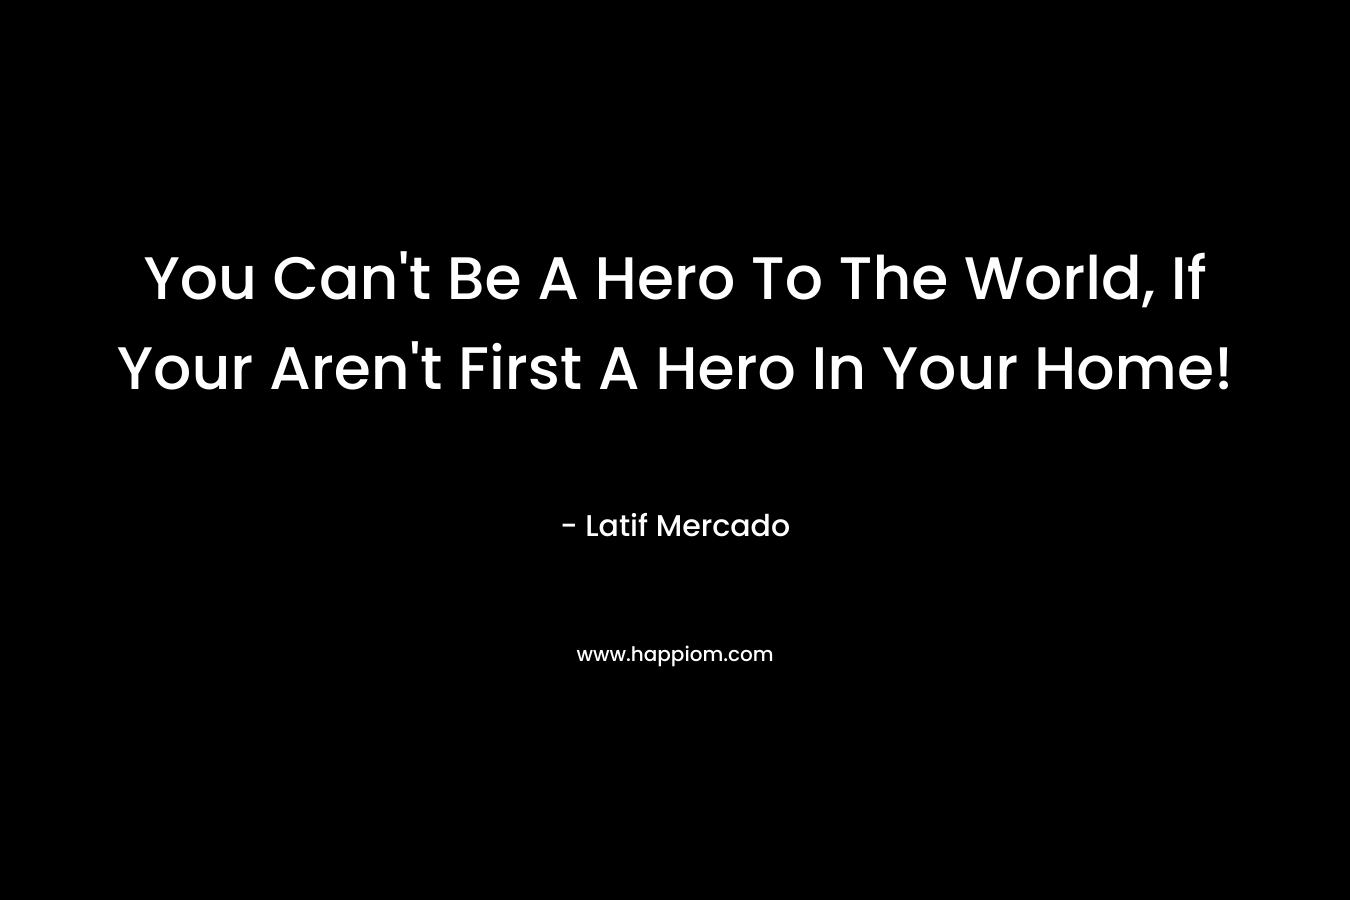 You Can’t Be A Hero To The World, If Your Aren’t First A Hero In Your Home! – Latif Mercado